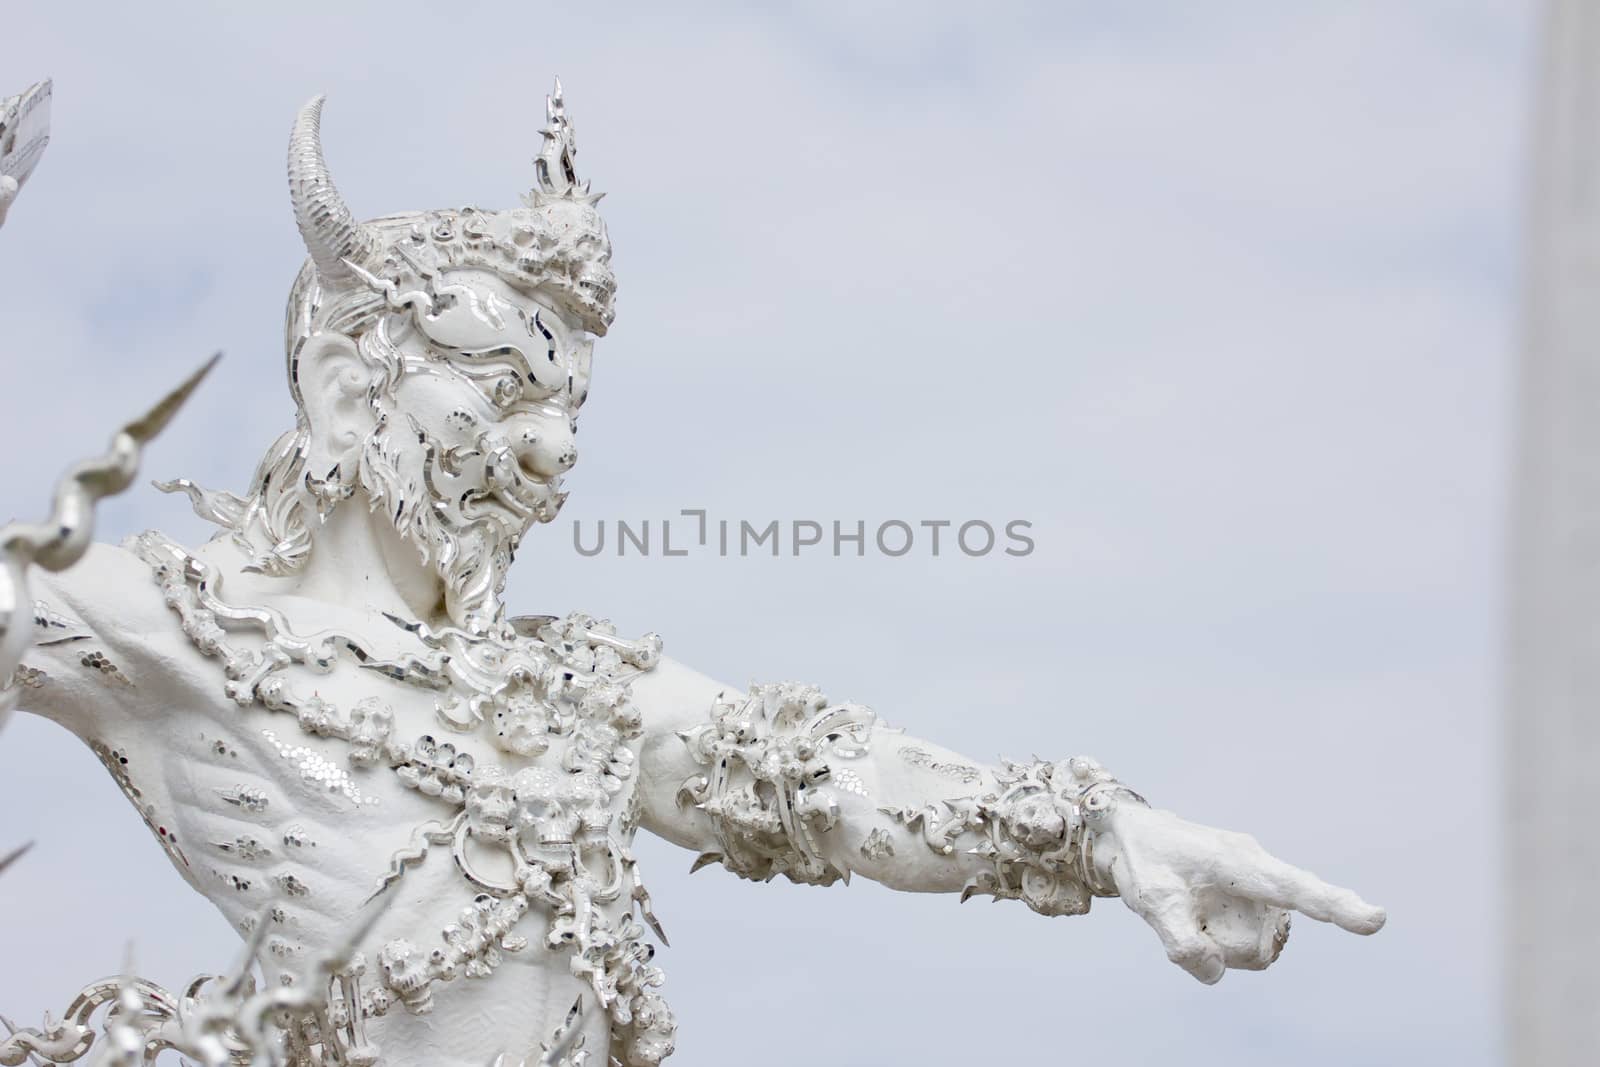 white giant sculpture pointing its enemies.